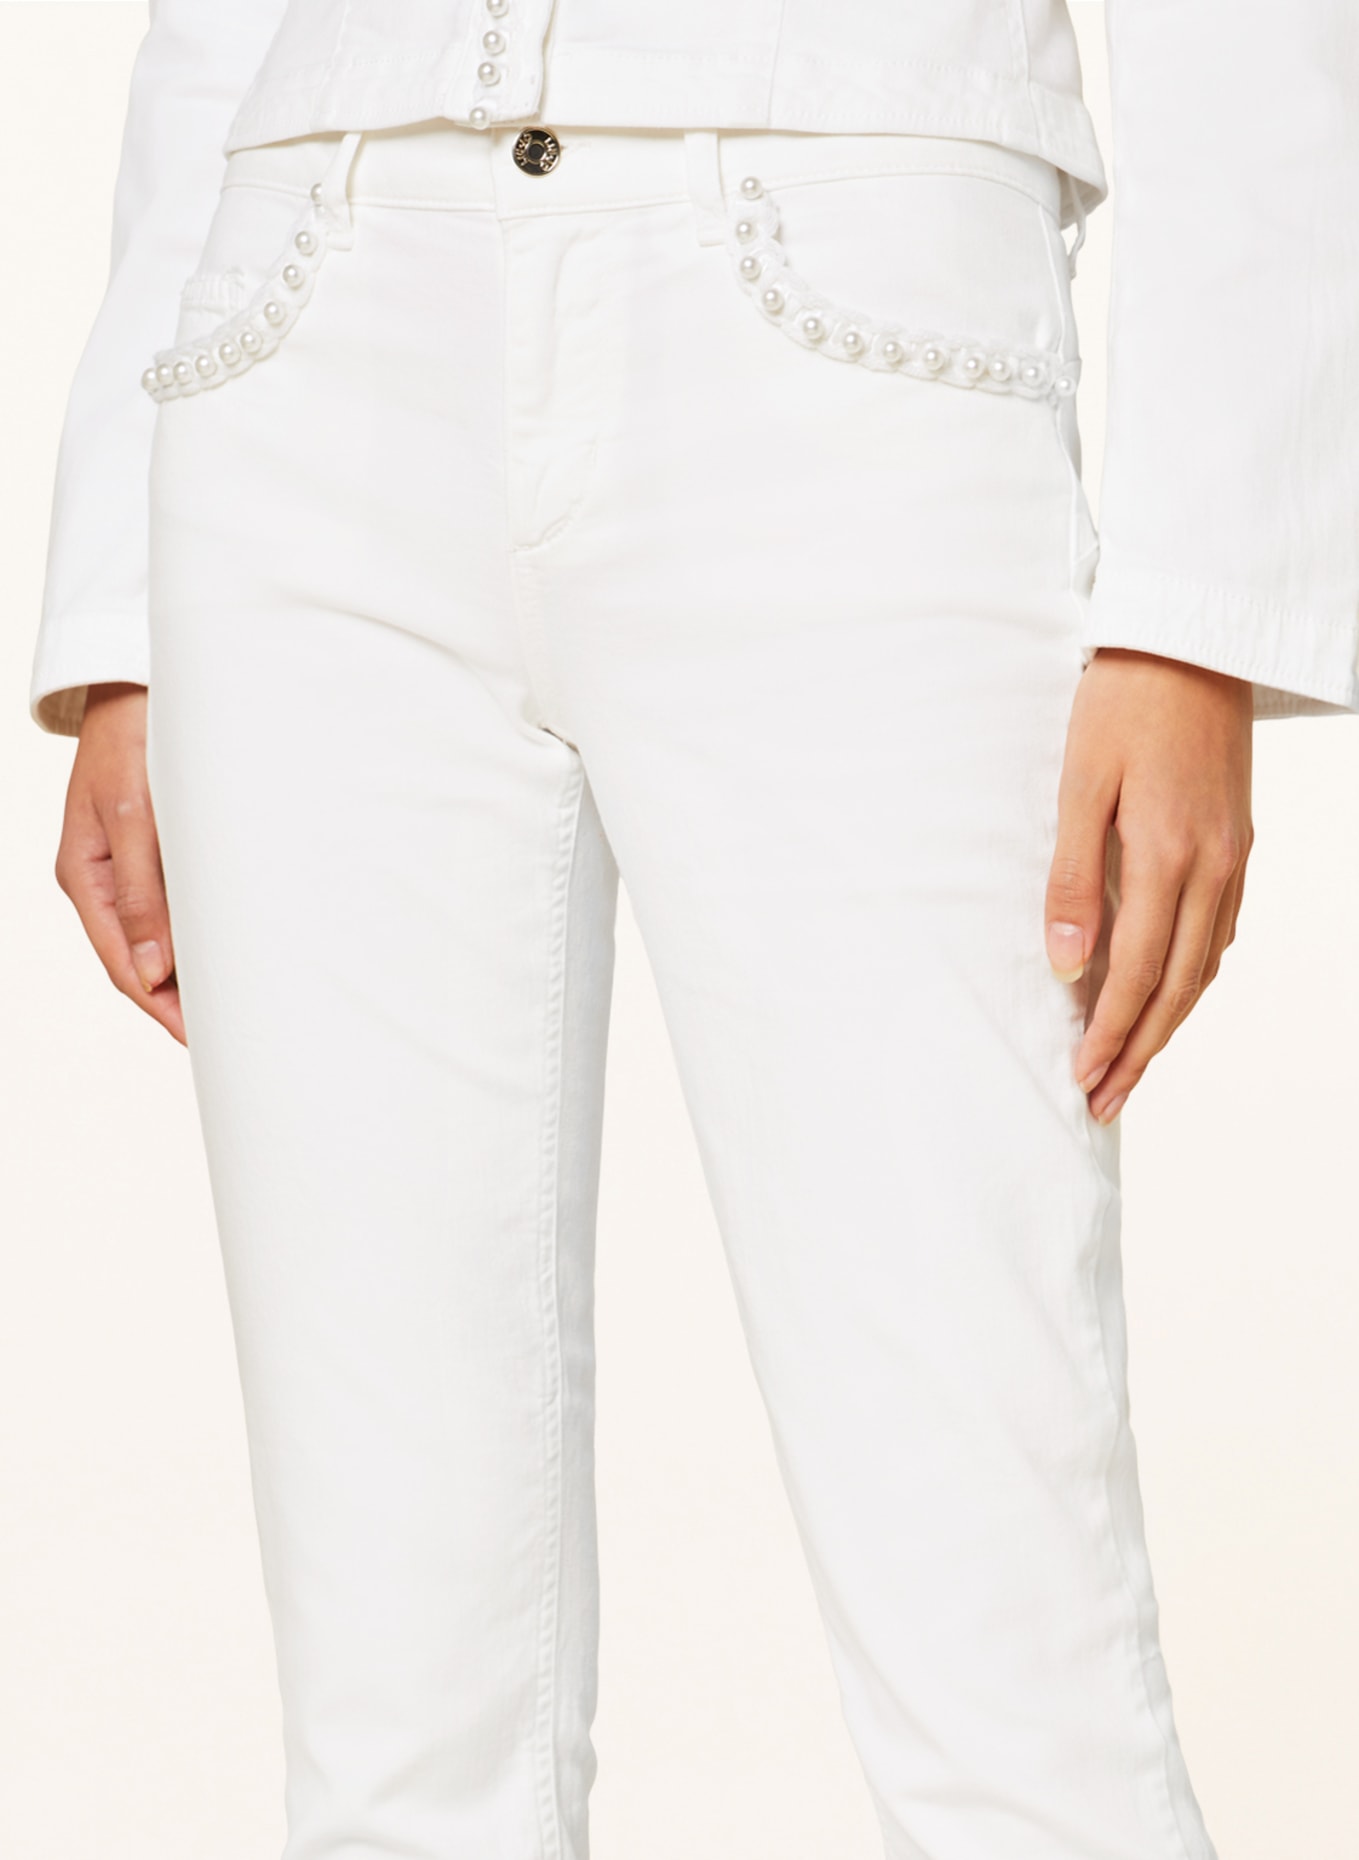 LIU JO Trousers with decorative beads, Color: WHITE (Image 5)